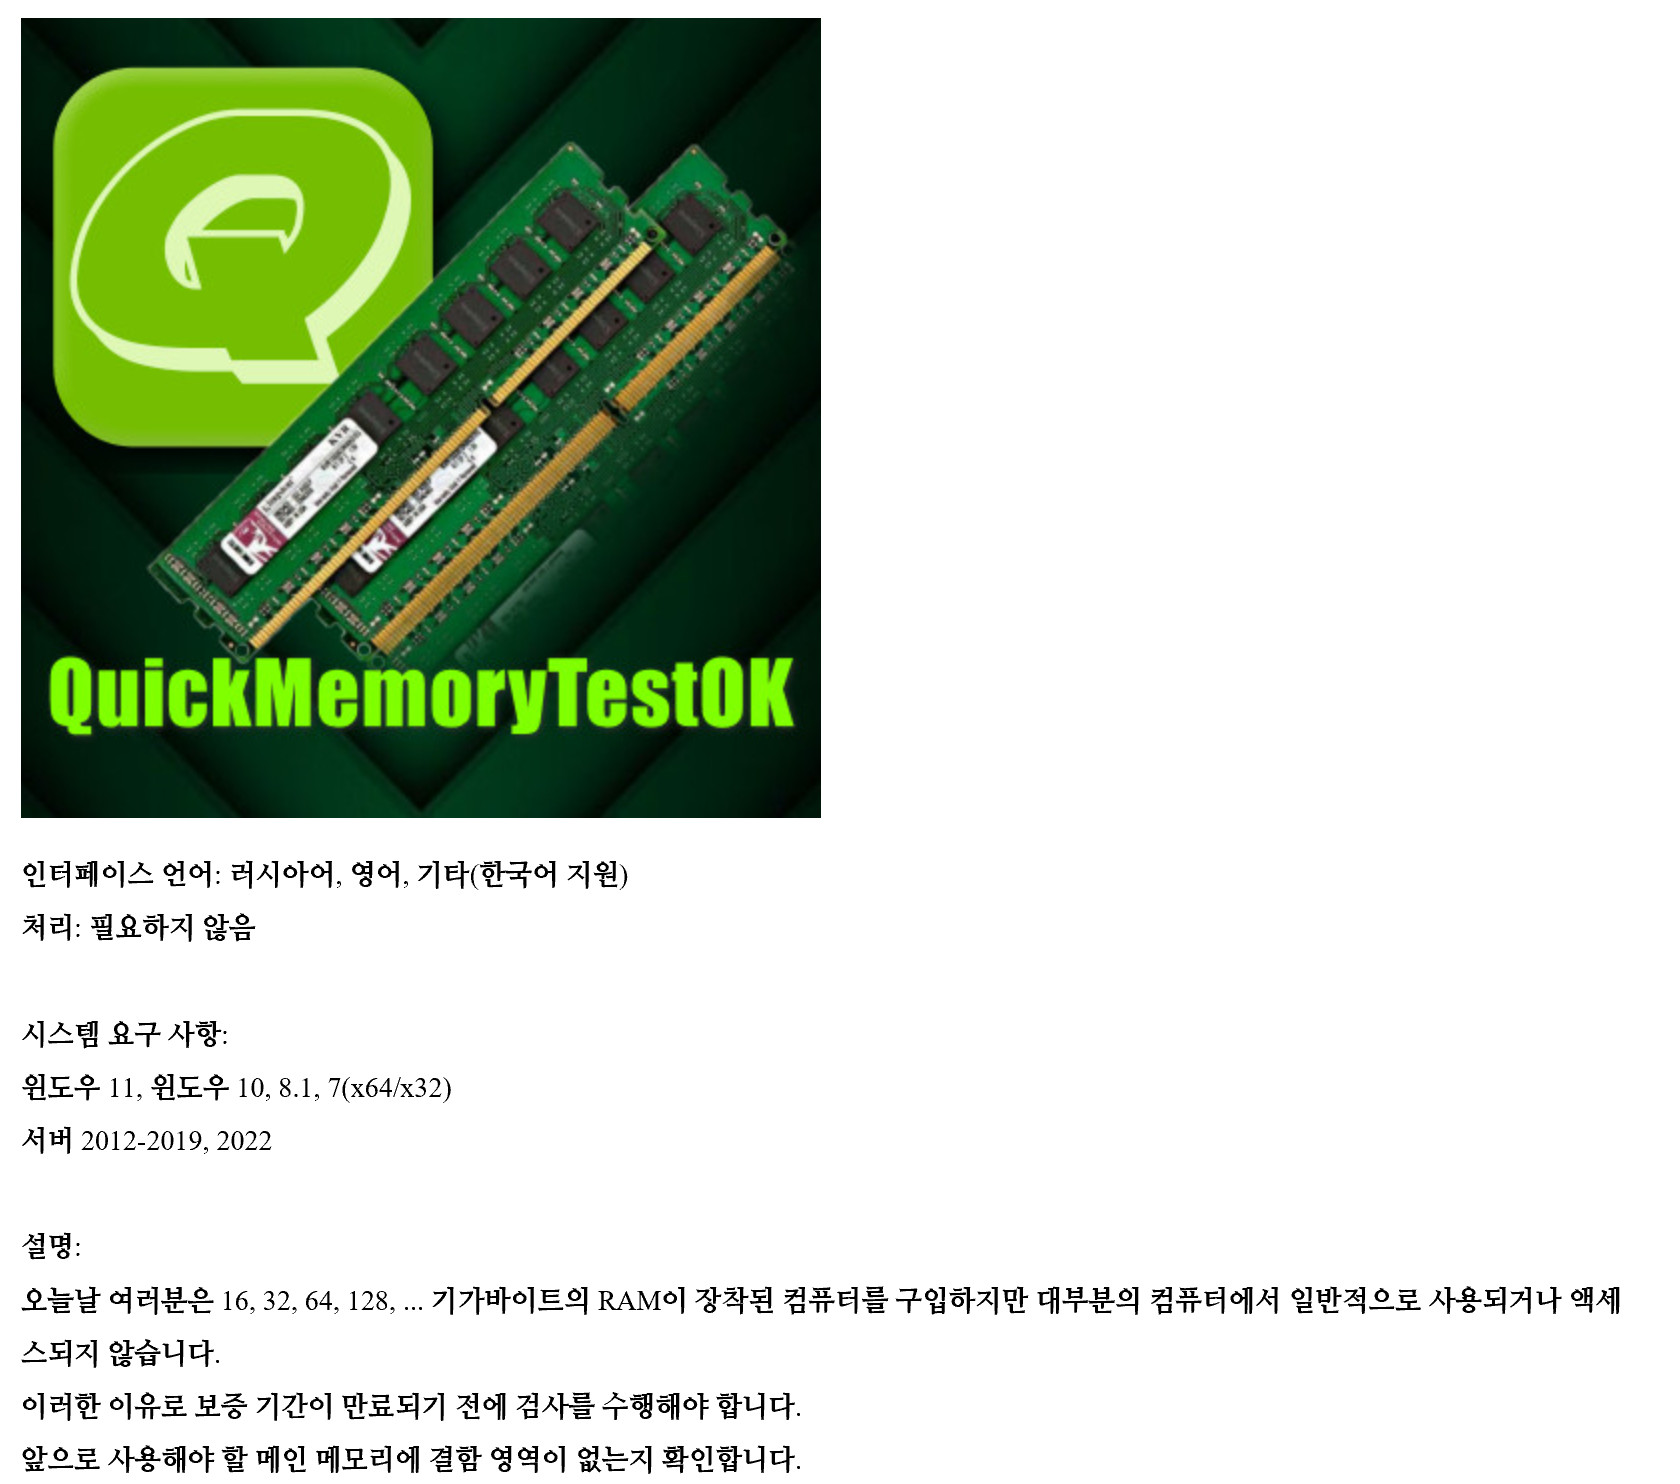 QuickMemoryTestOK 4.68 download the last version for android